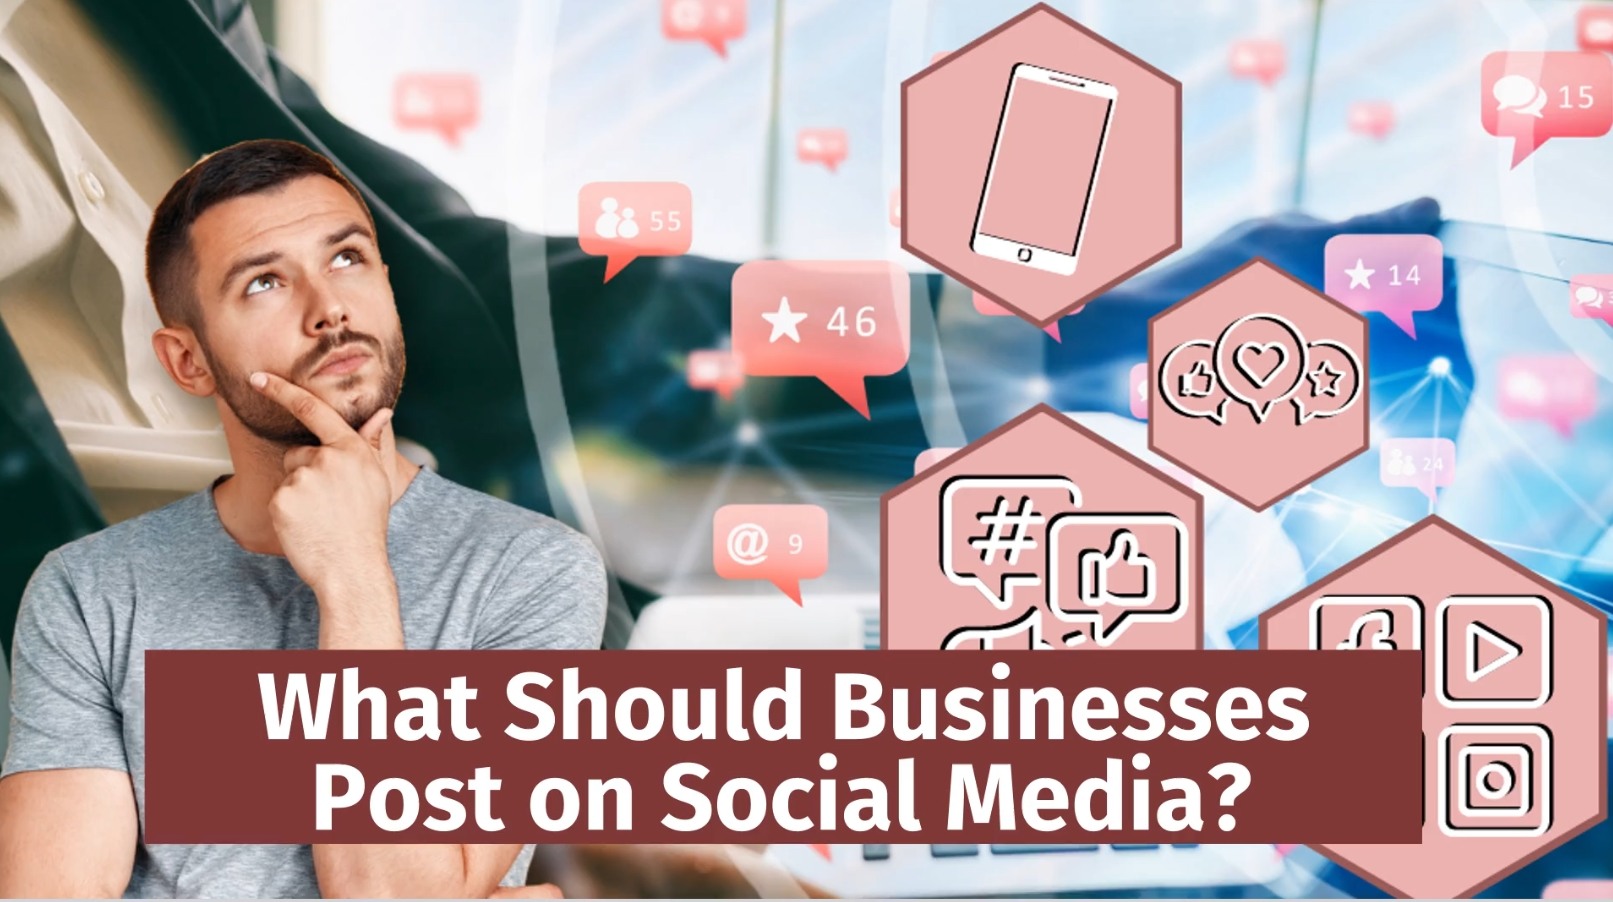 What Should Businesses Post on Social Media?